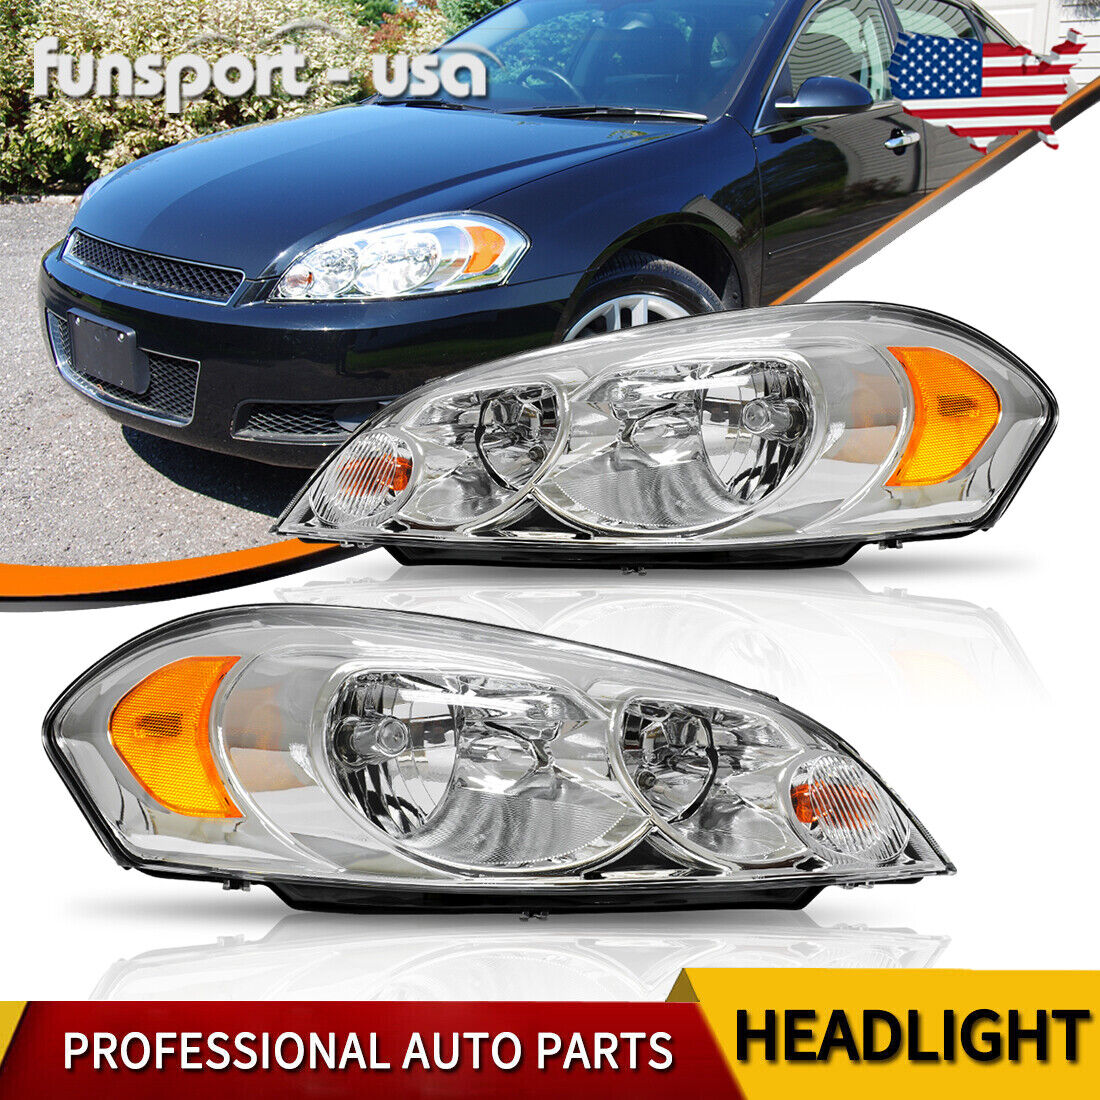 Chrome Headlights Replacement for 06-07 Monte Carlo 06-13 Chevy Impala Headlamps